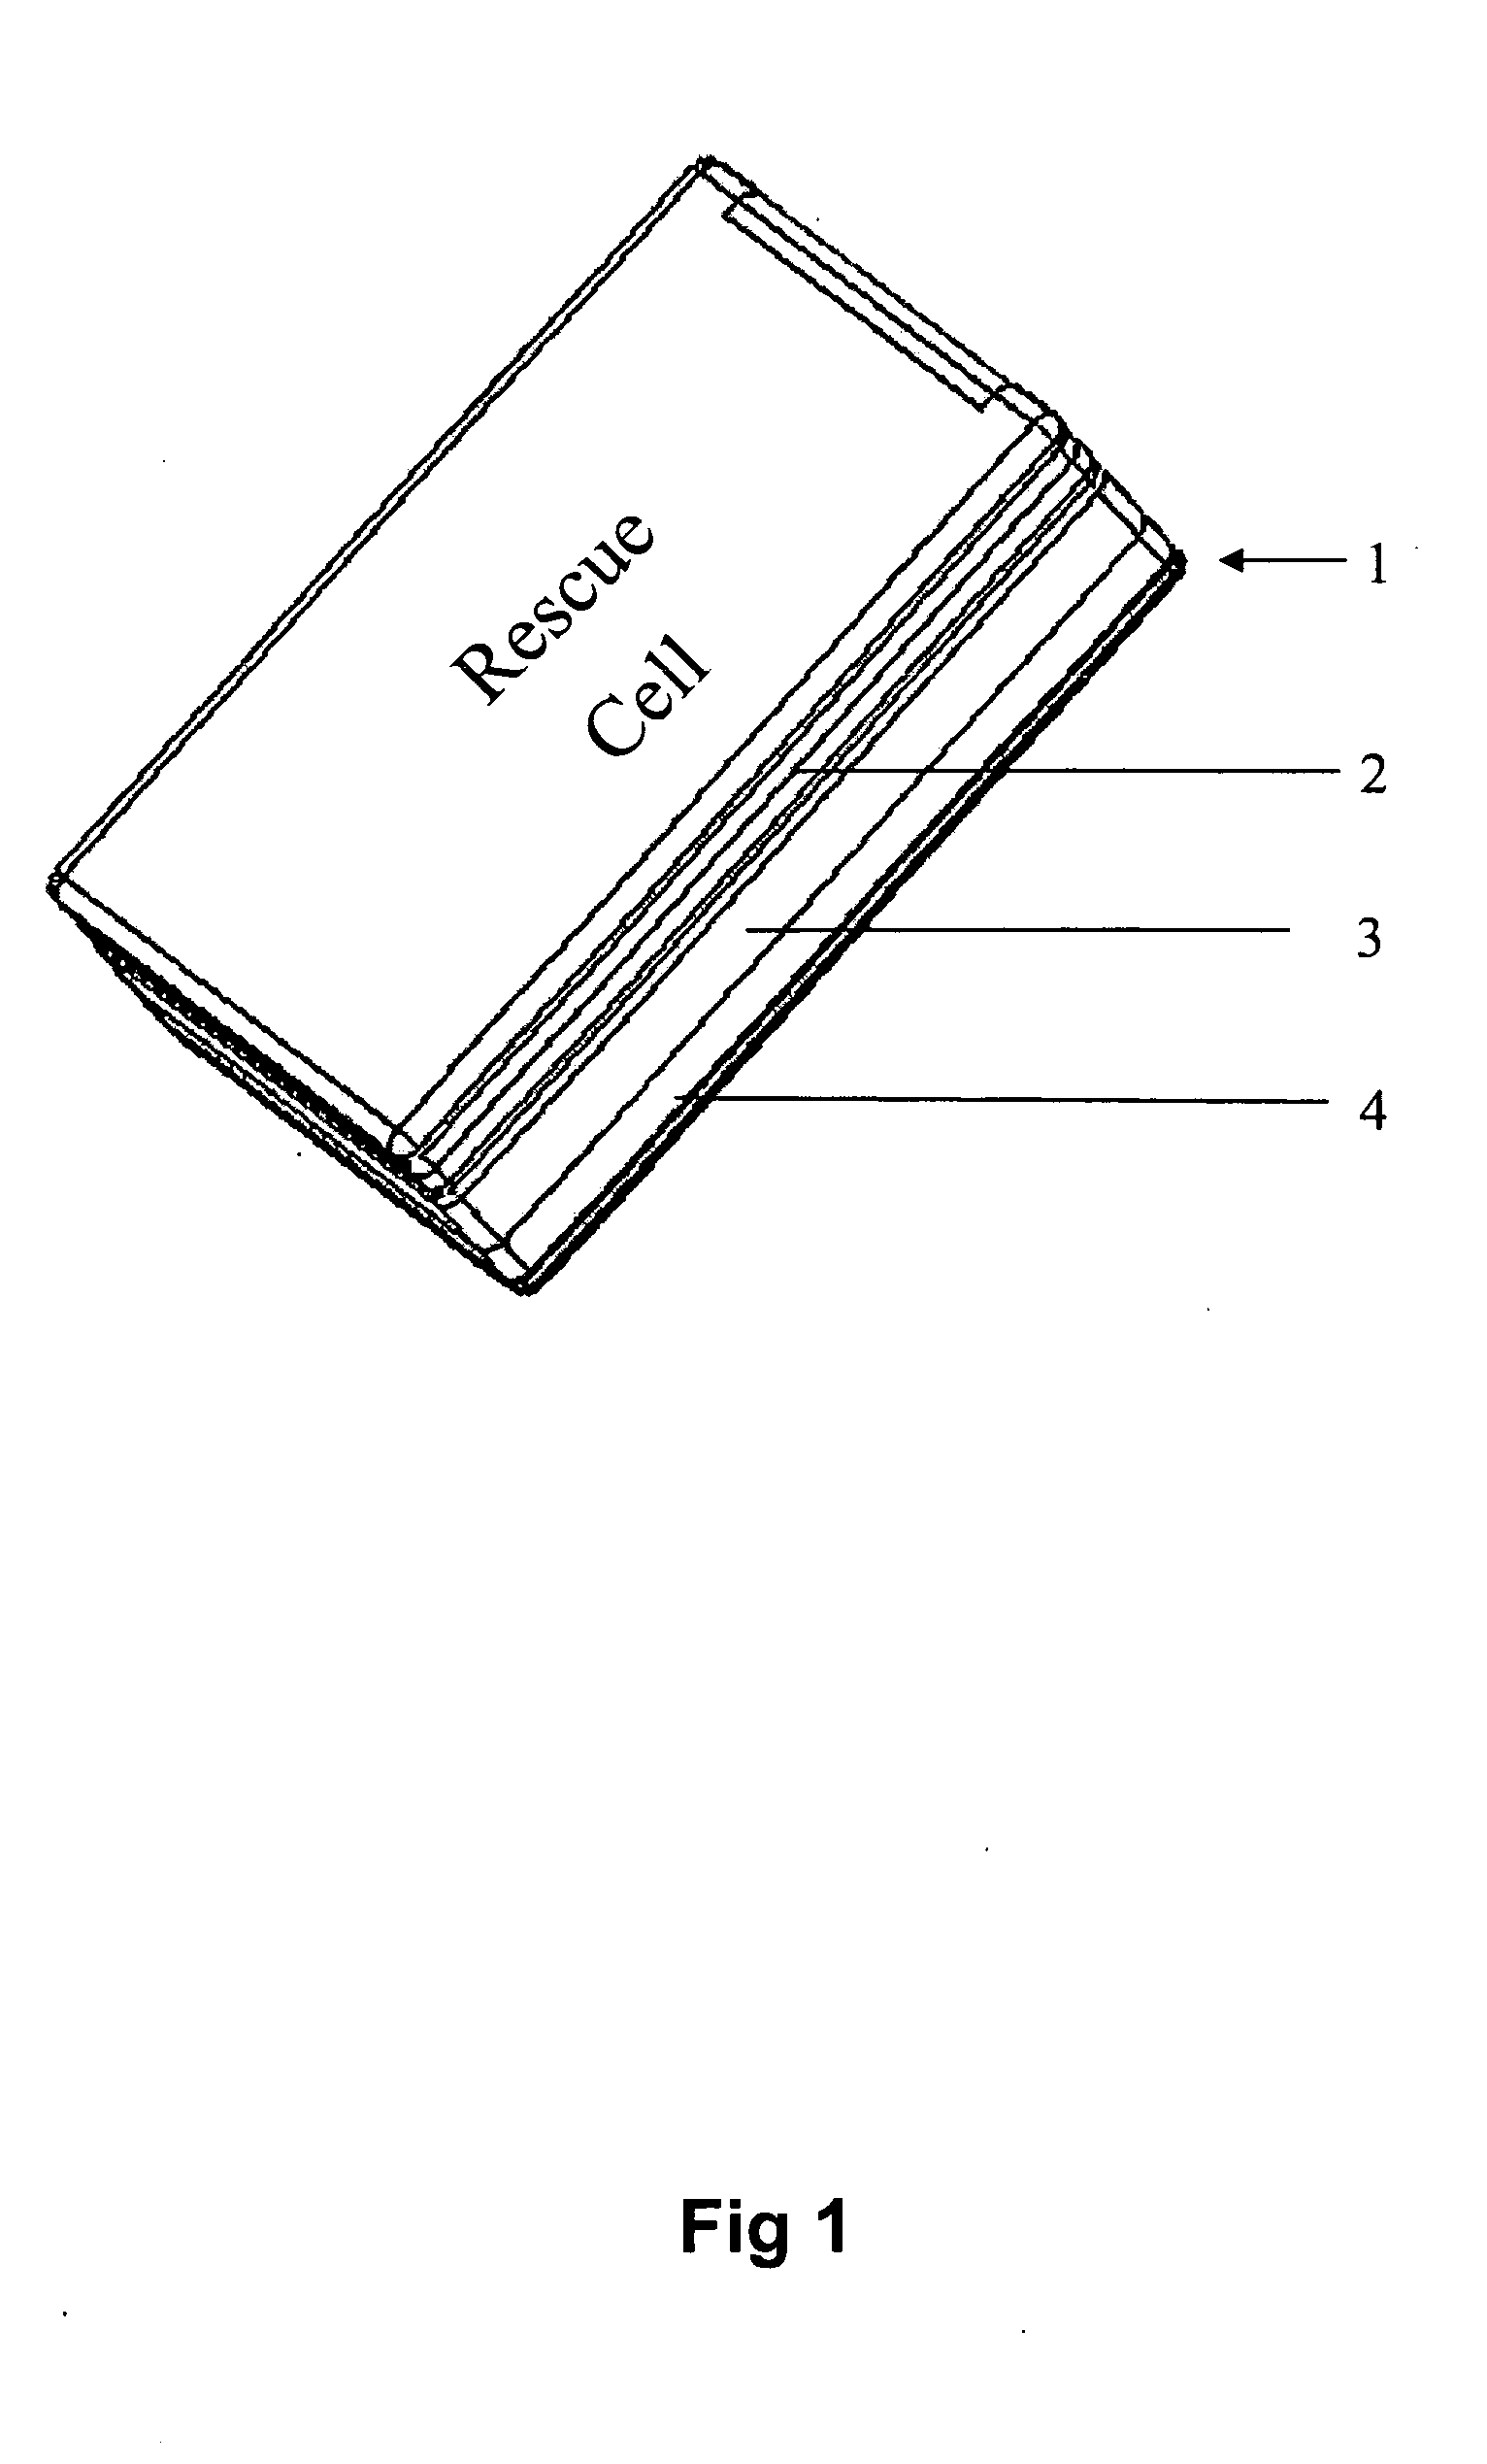 Method and apparatus for remote-operated automated external defibrillator incorporated into a hand-held device